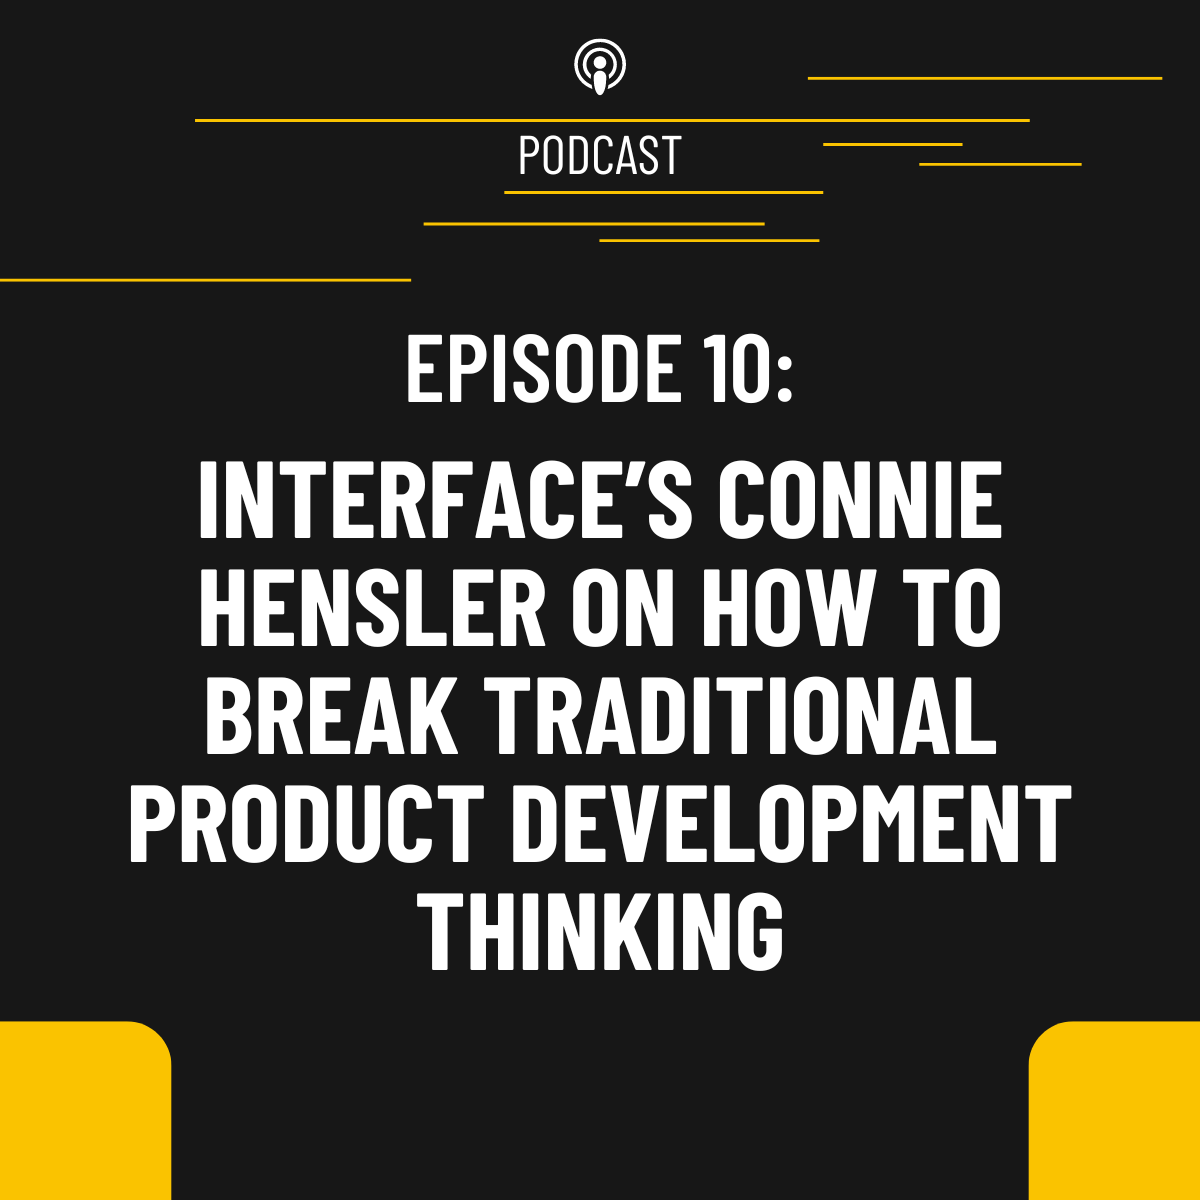 Episode 10: Interface's Connie Hensler on how to break traditional product development thinking